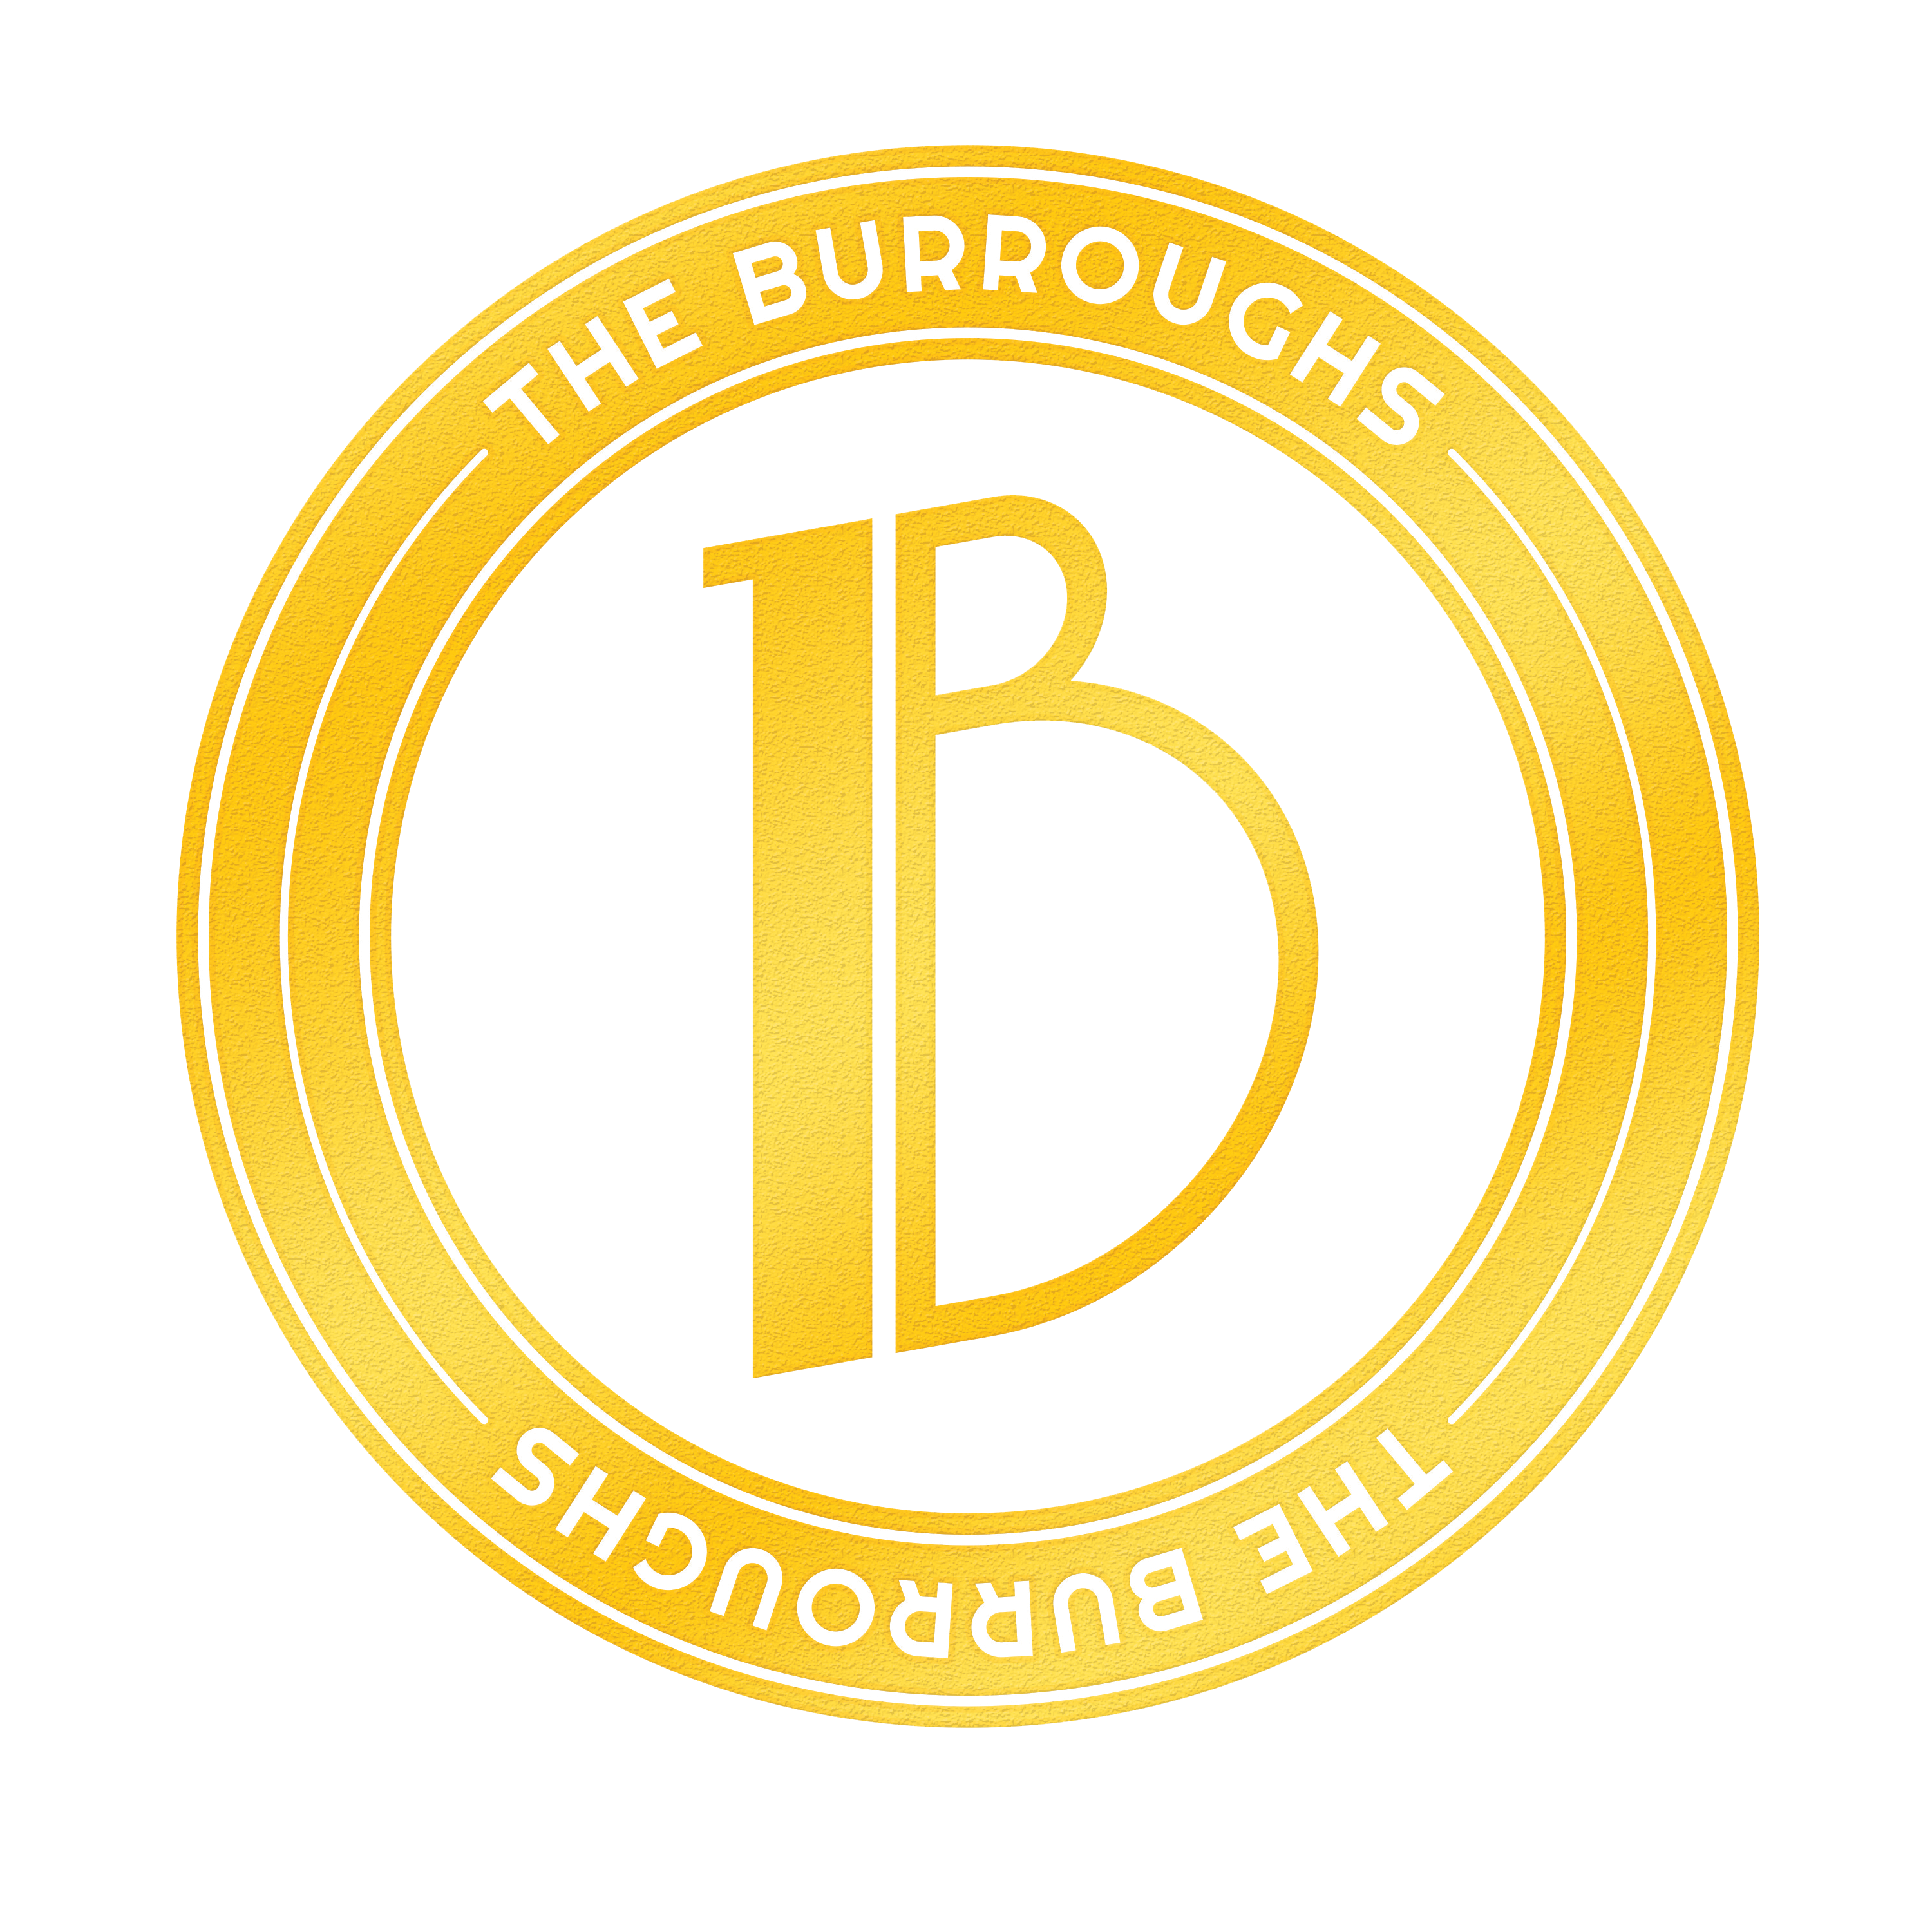 The Burroughs